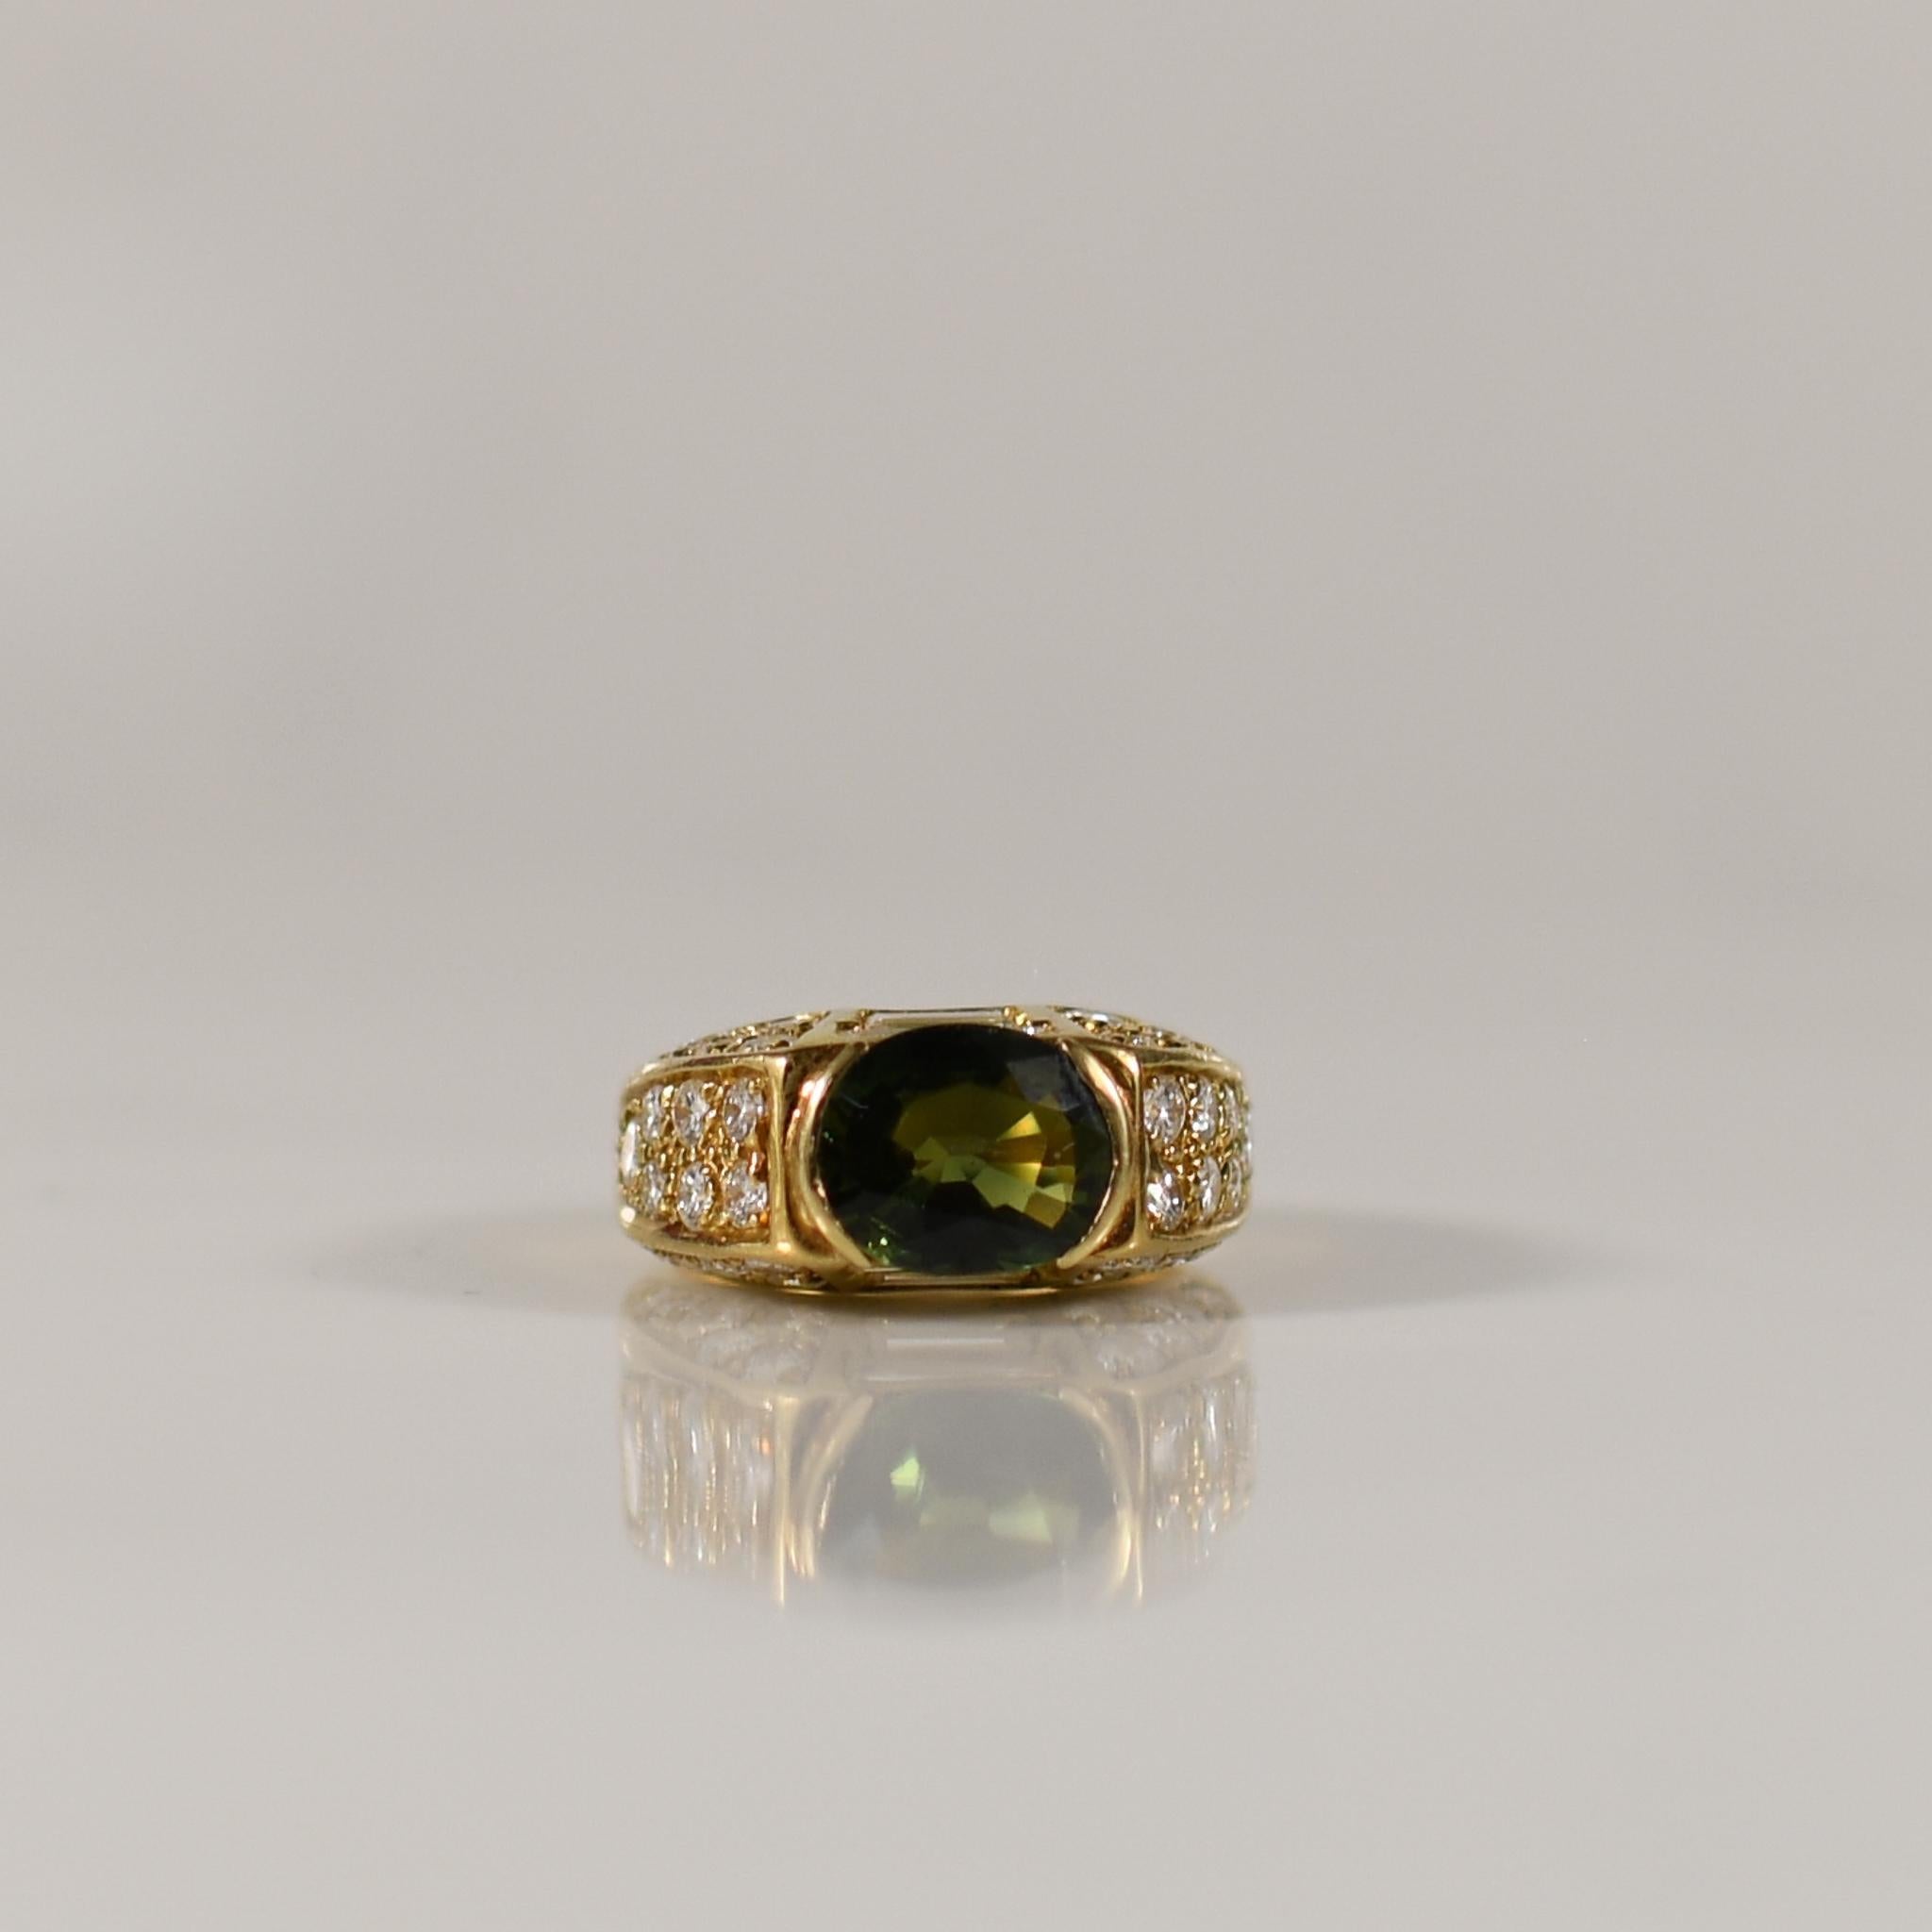 Experience modern elegance with this contemporary 3.5 carat green sapphire ring, a captivating embodiment of sophistication and style. The striking green sapphire, with its vivid hue and remarkable clarity, commands attention as the centerpiece of